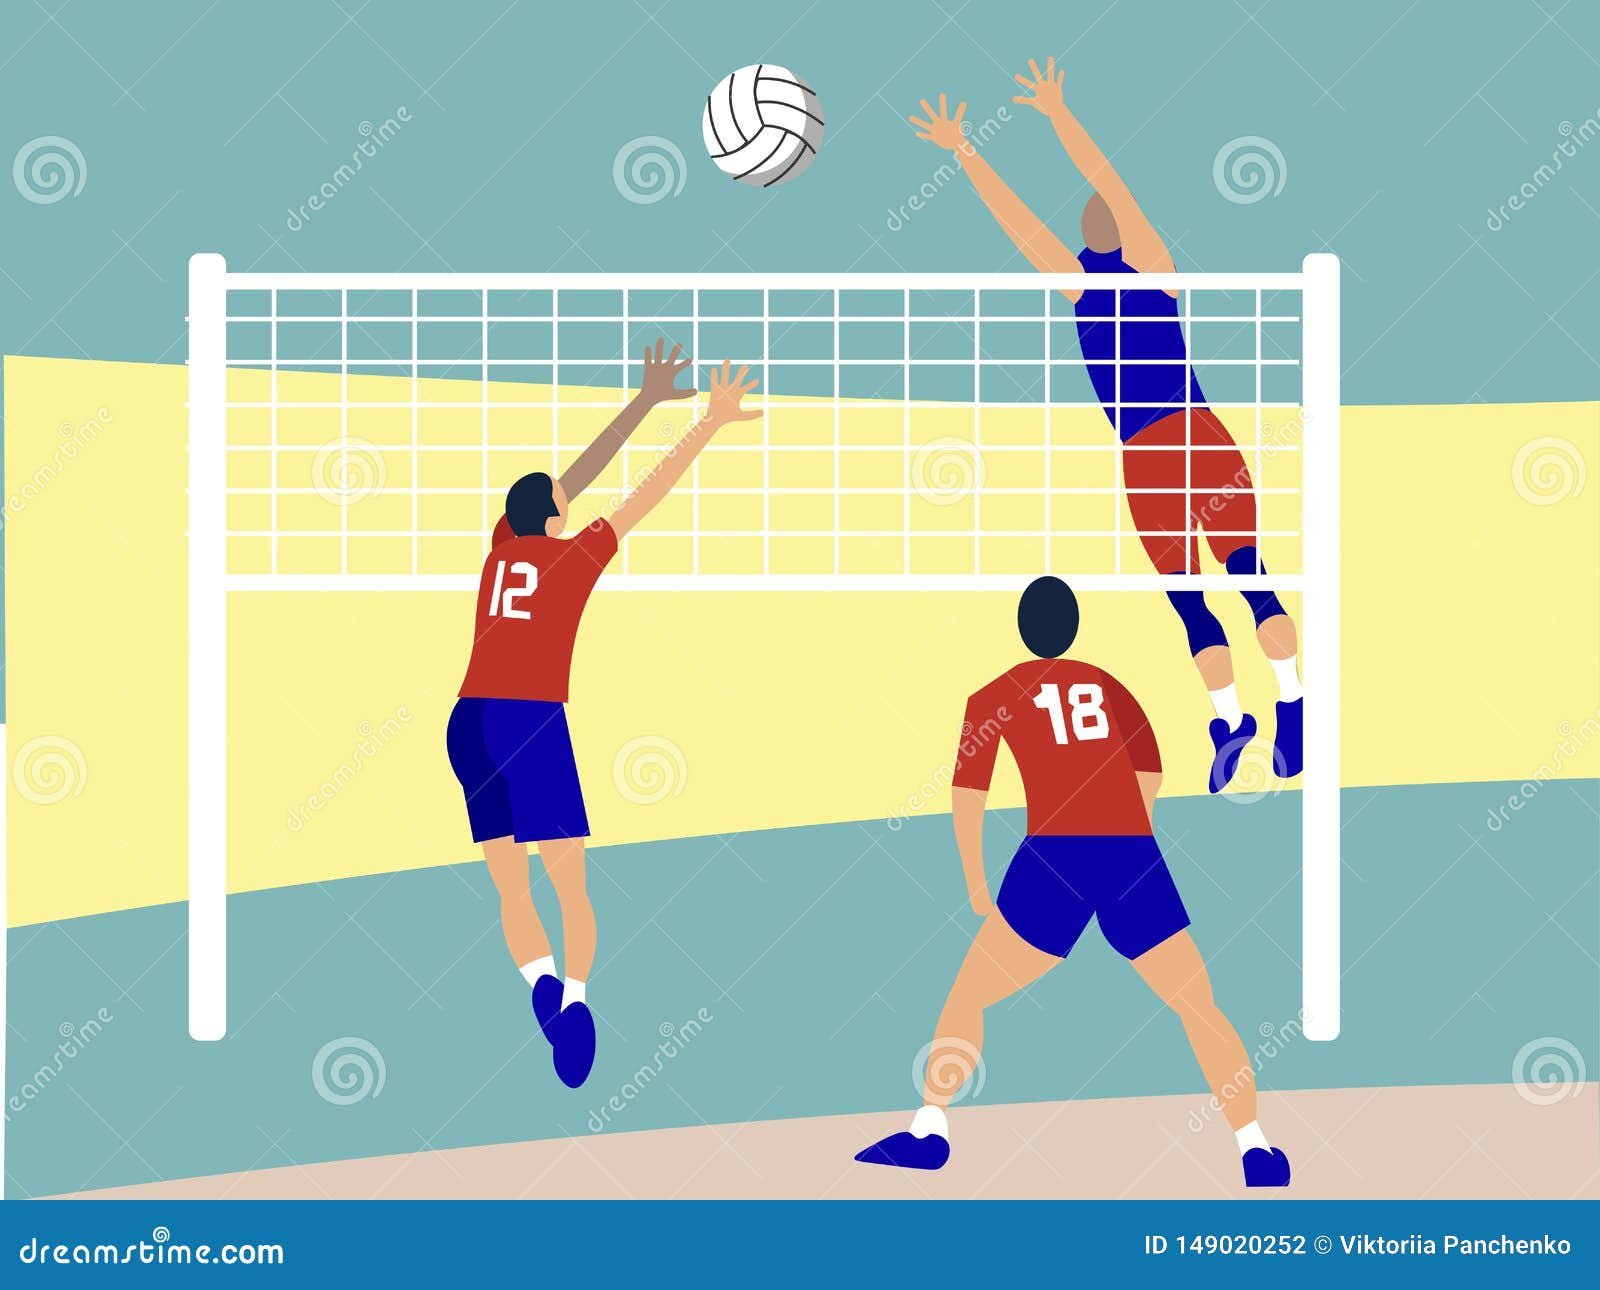 Contact Sport, Volleyball. in Minimalist Style Cartoon Flat Vector ...